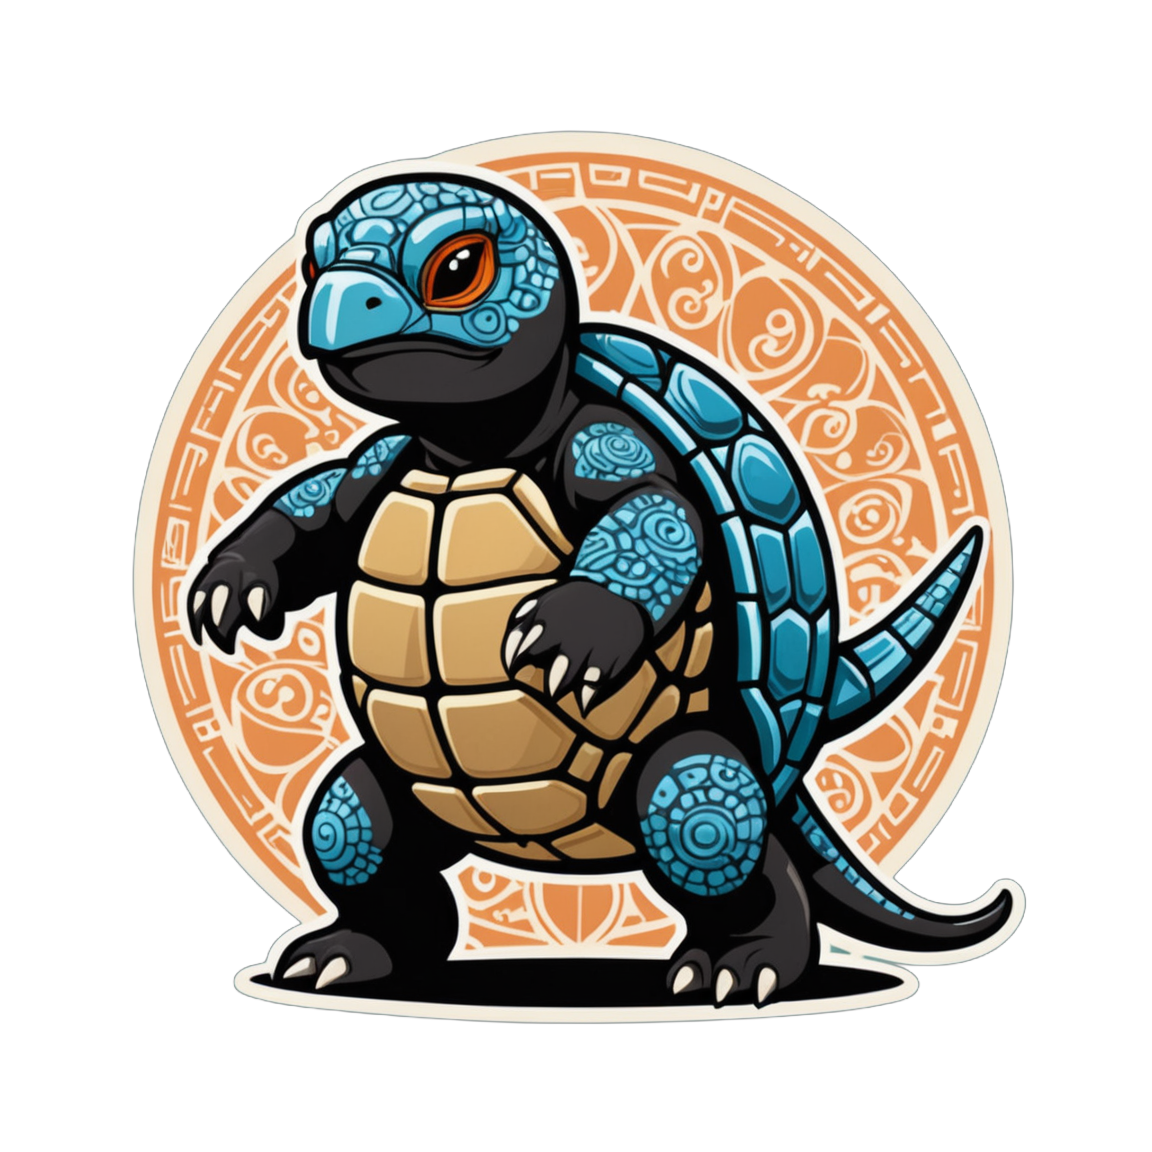 A turtle characterized as a ninja, with a patterned shell resembling ancient Japanese mosaics, stealthy and agile